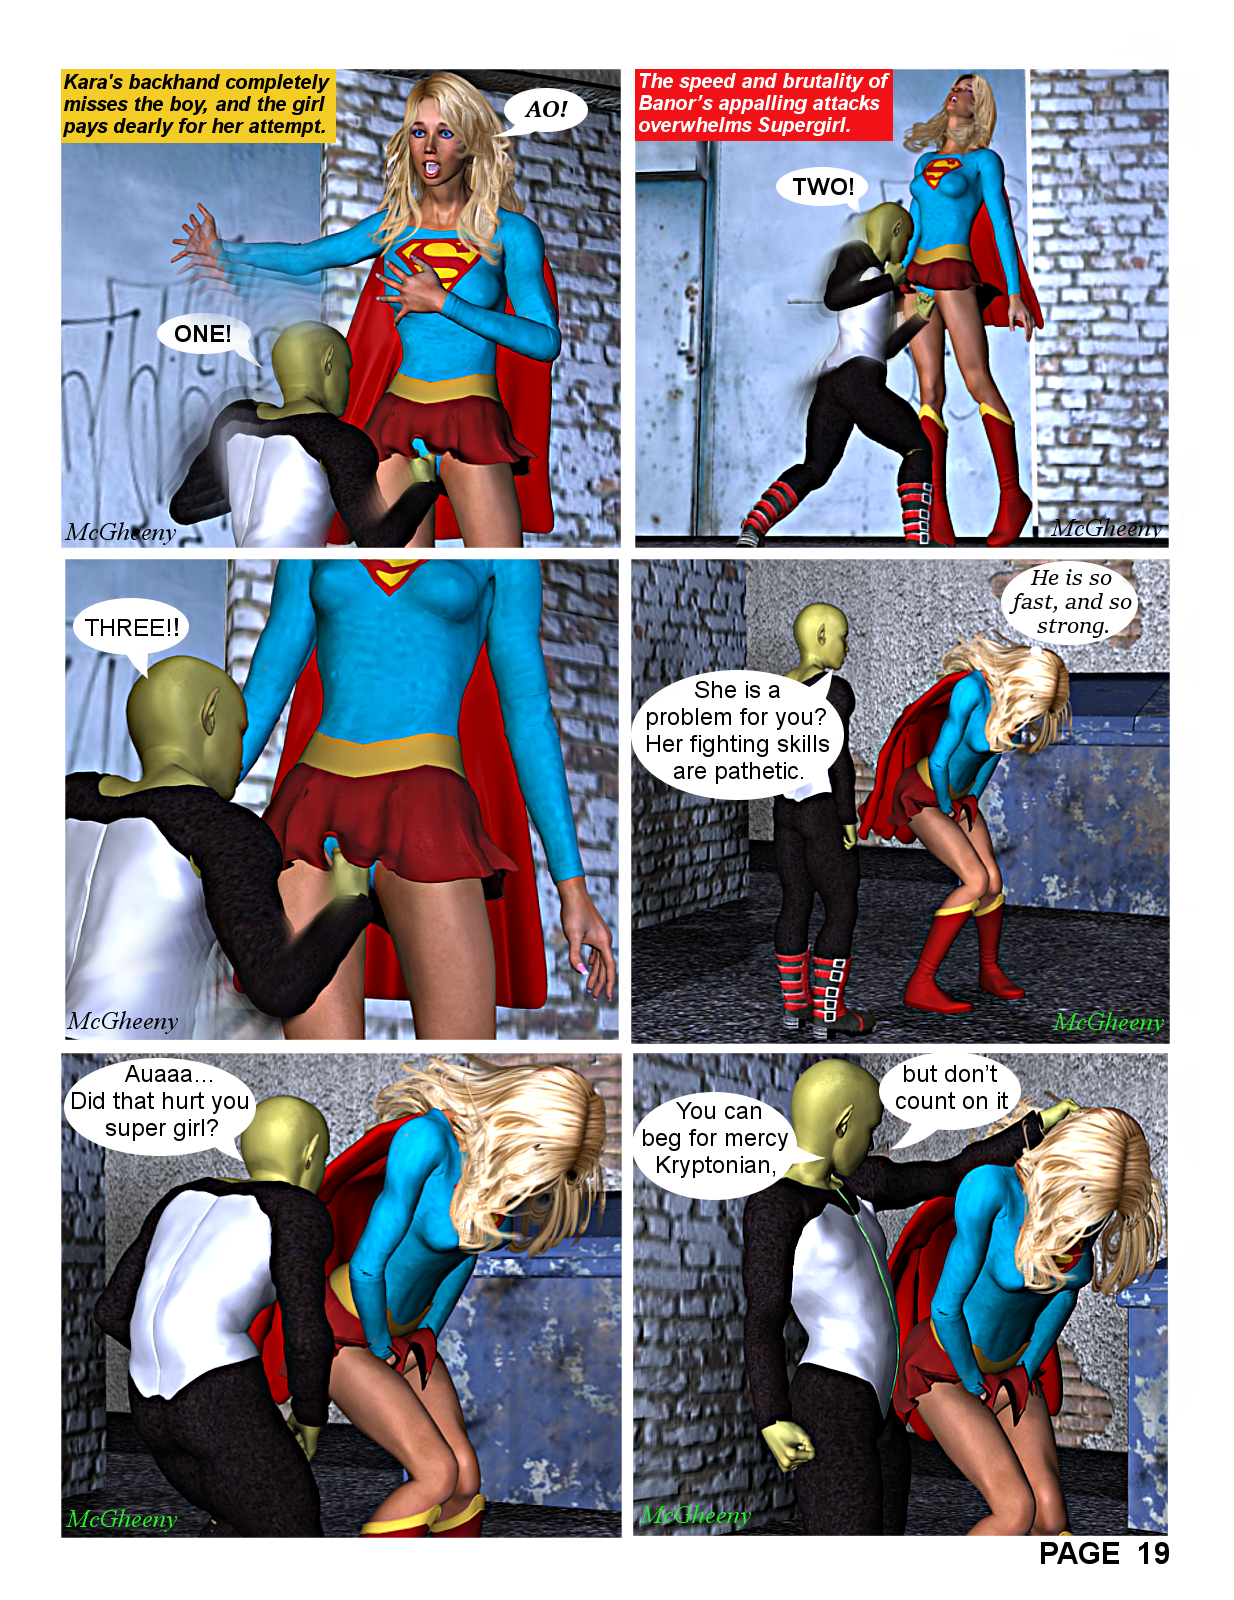 Supergirl in Banors Prize Page 19.png